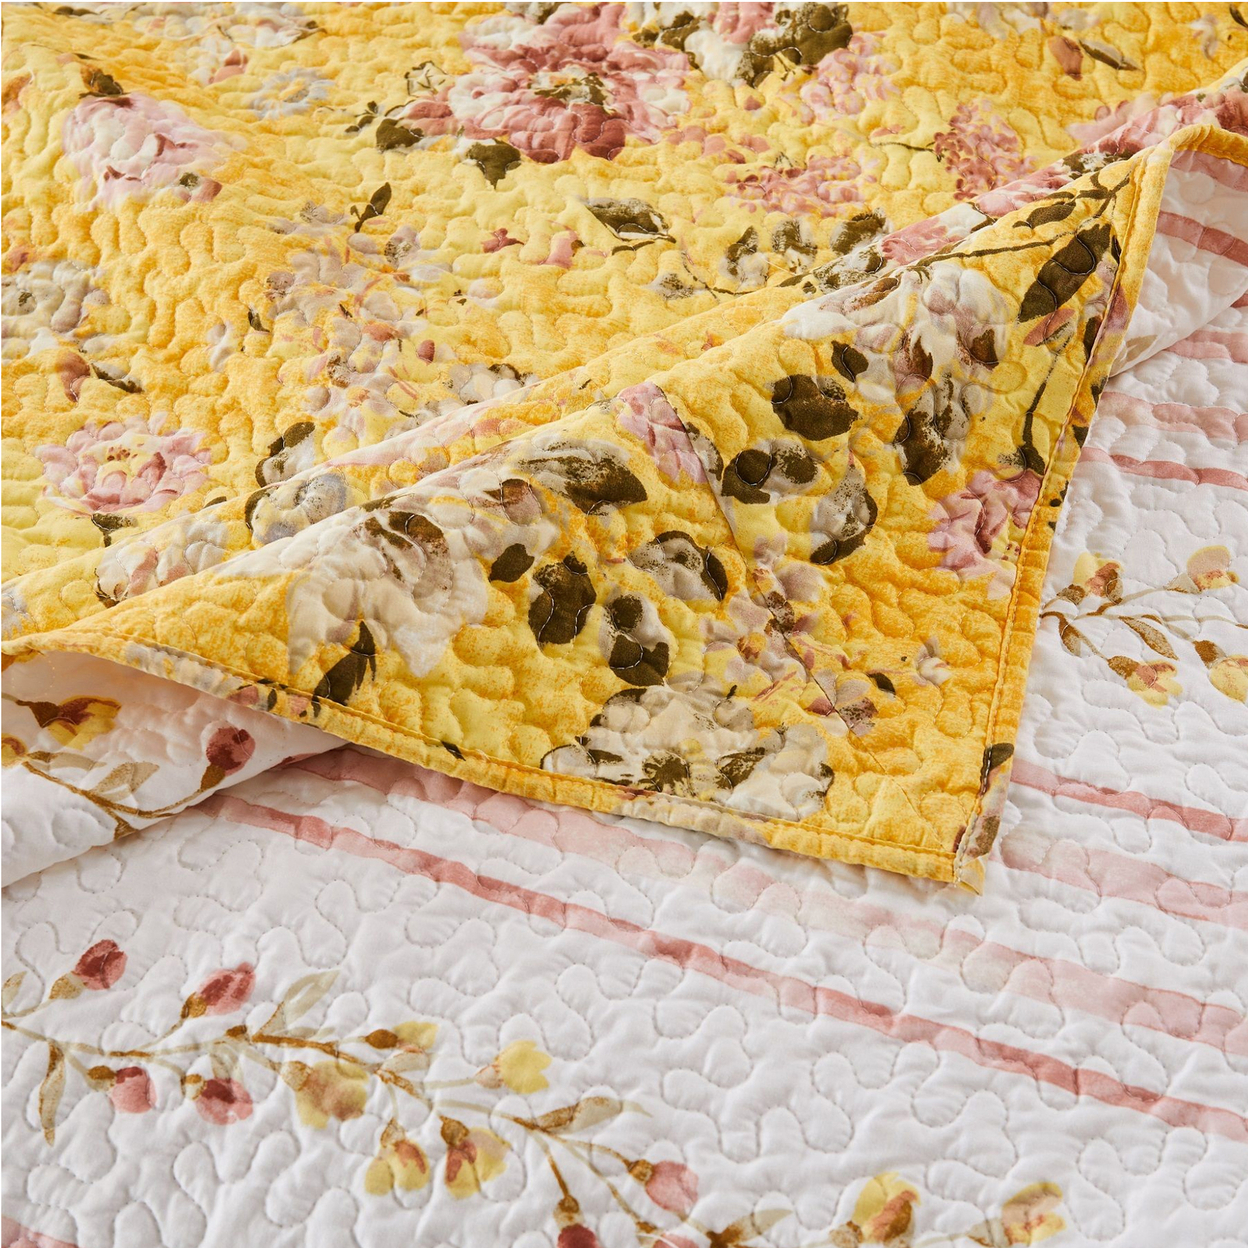 3 Piece Full Queen Quilt Set With Floral Print, Yellow- Saltoro Sherpi